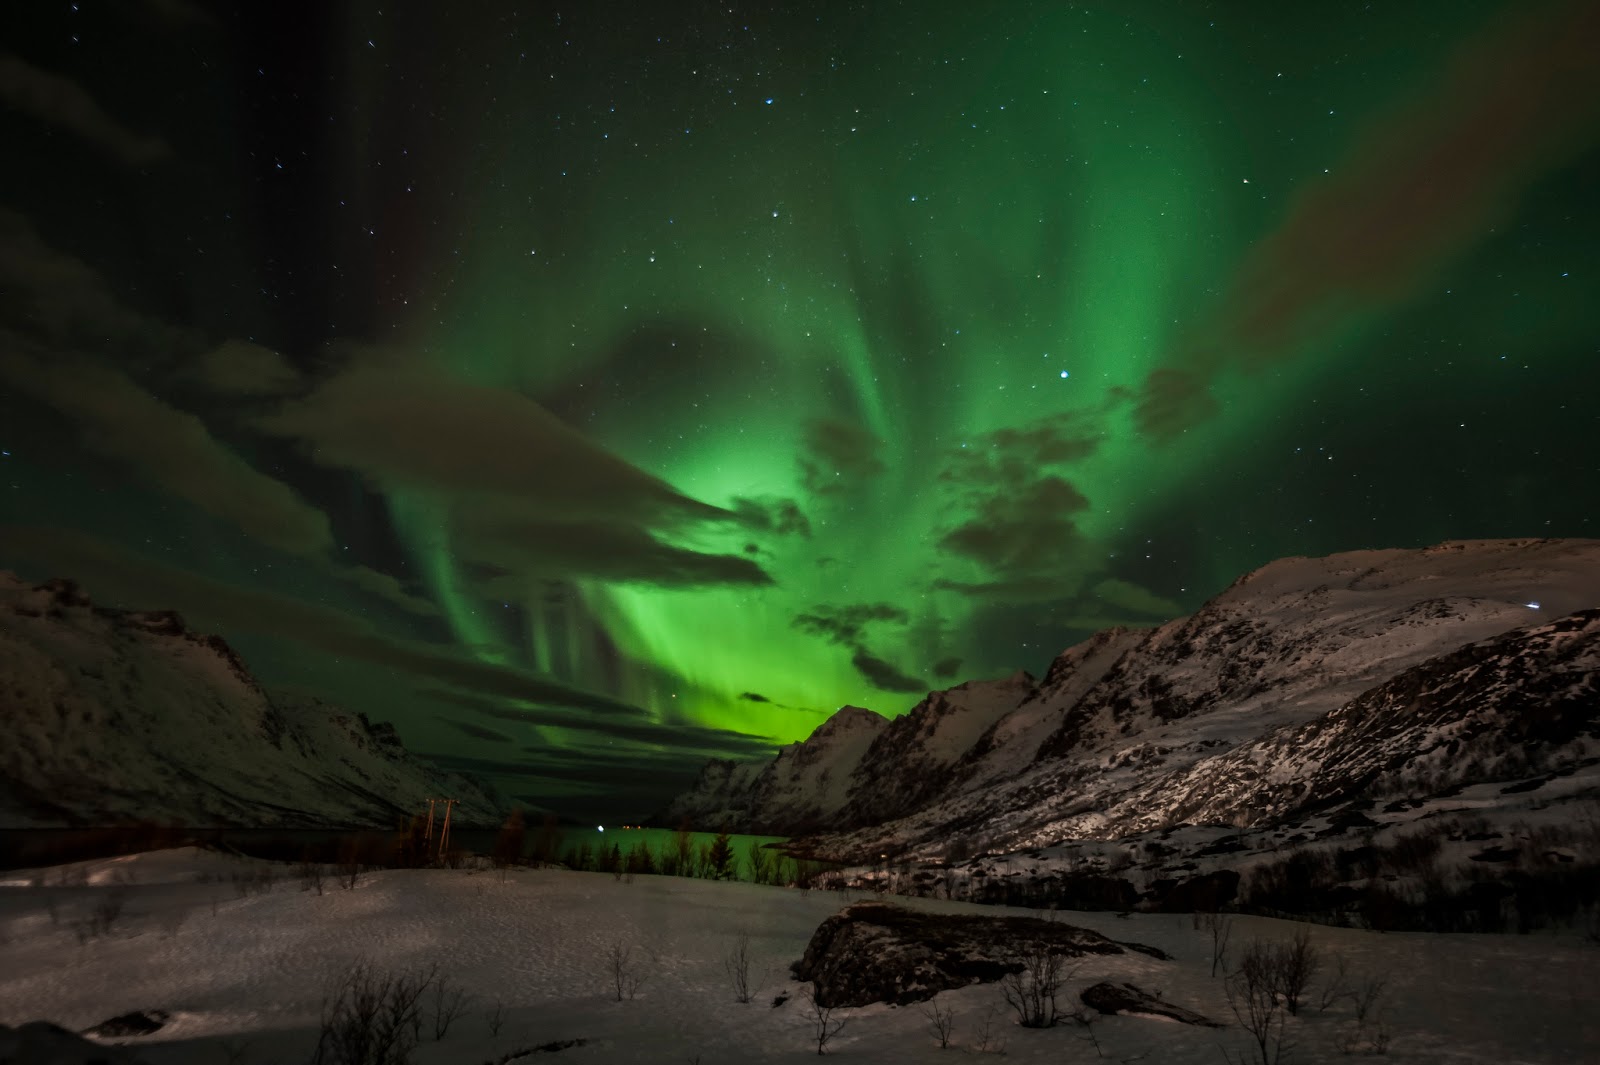 The dazzling display of the Northern Lights over Tromsø, Norway. Photo: Mark Robinson.